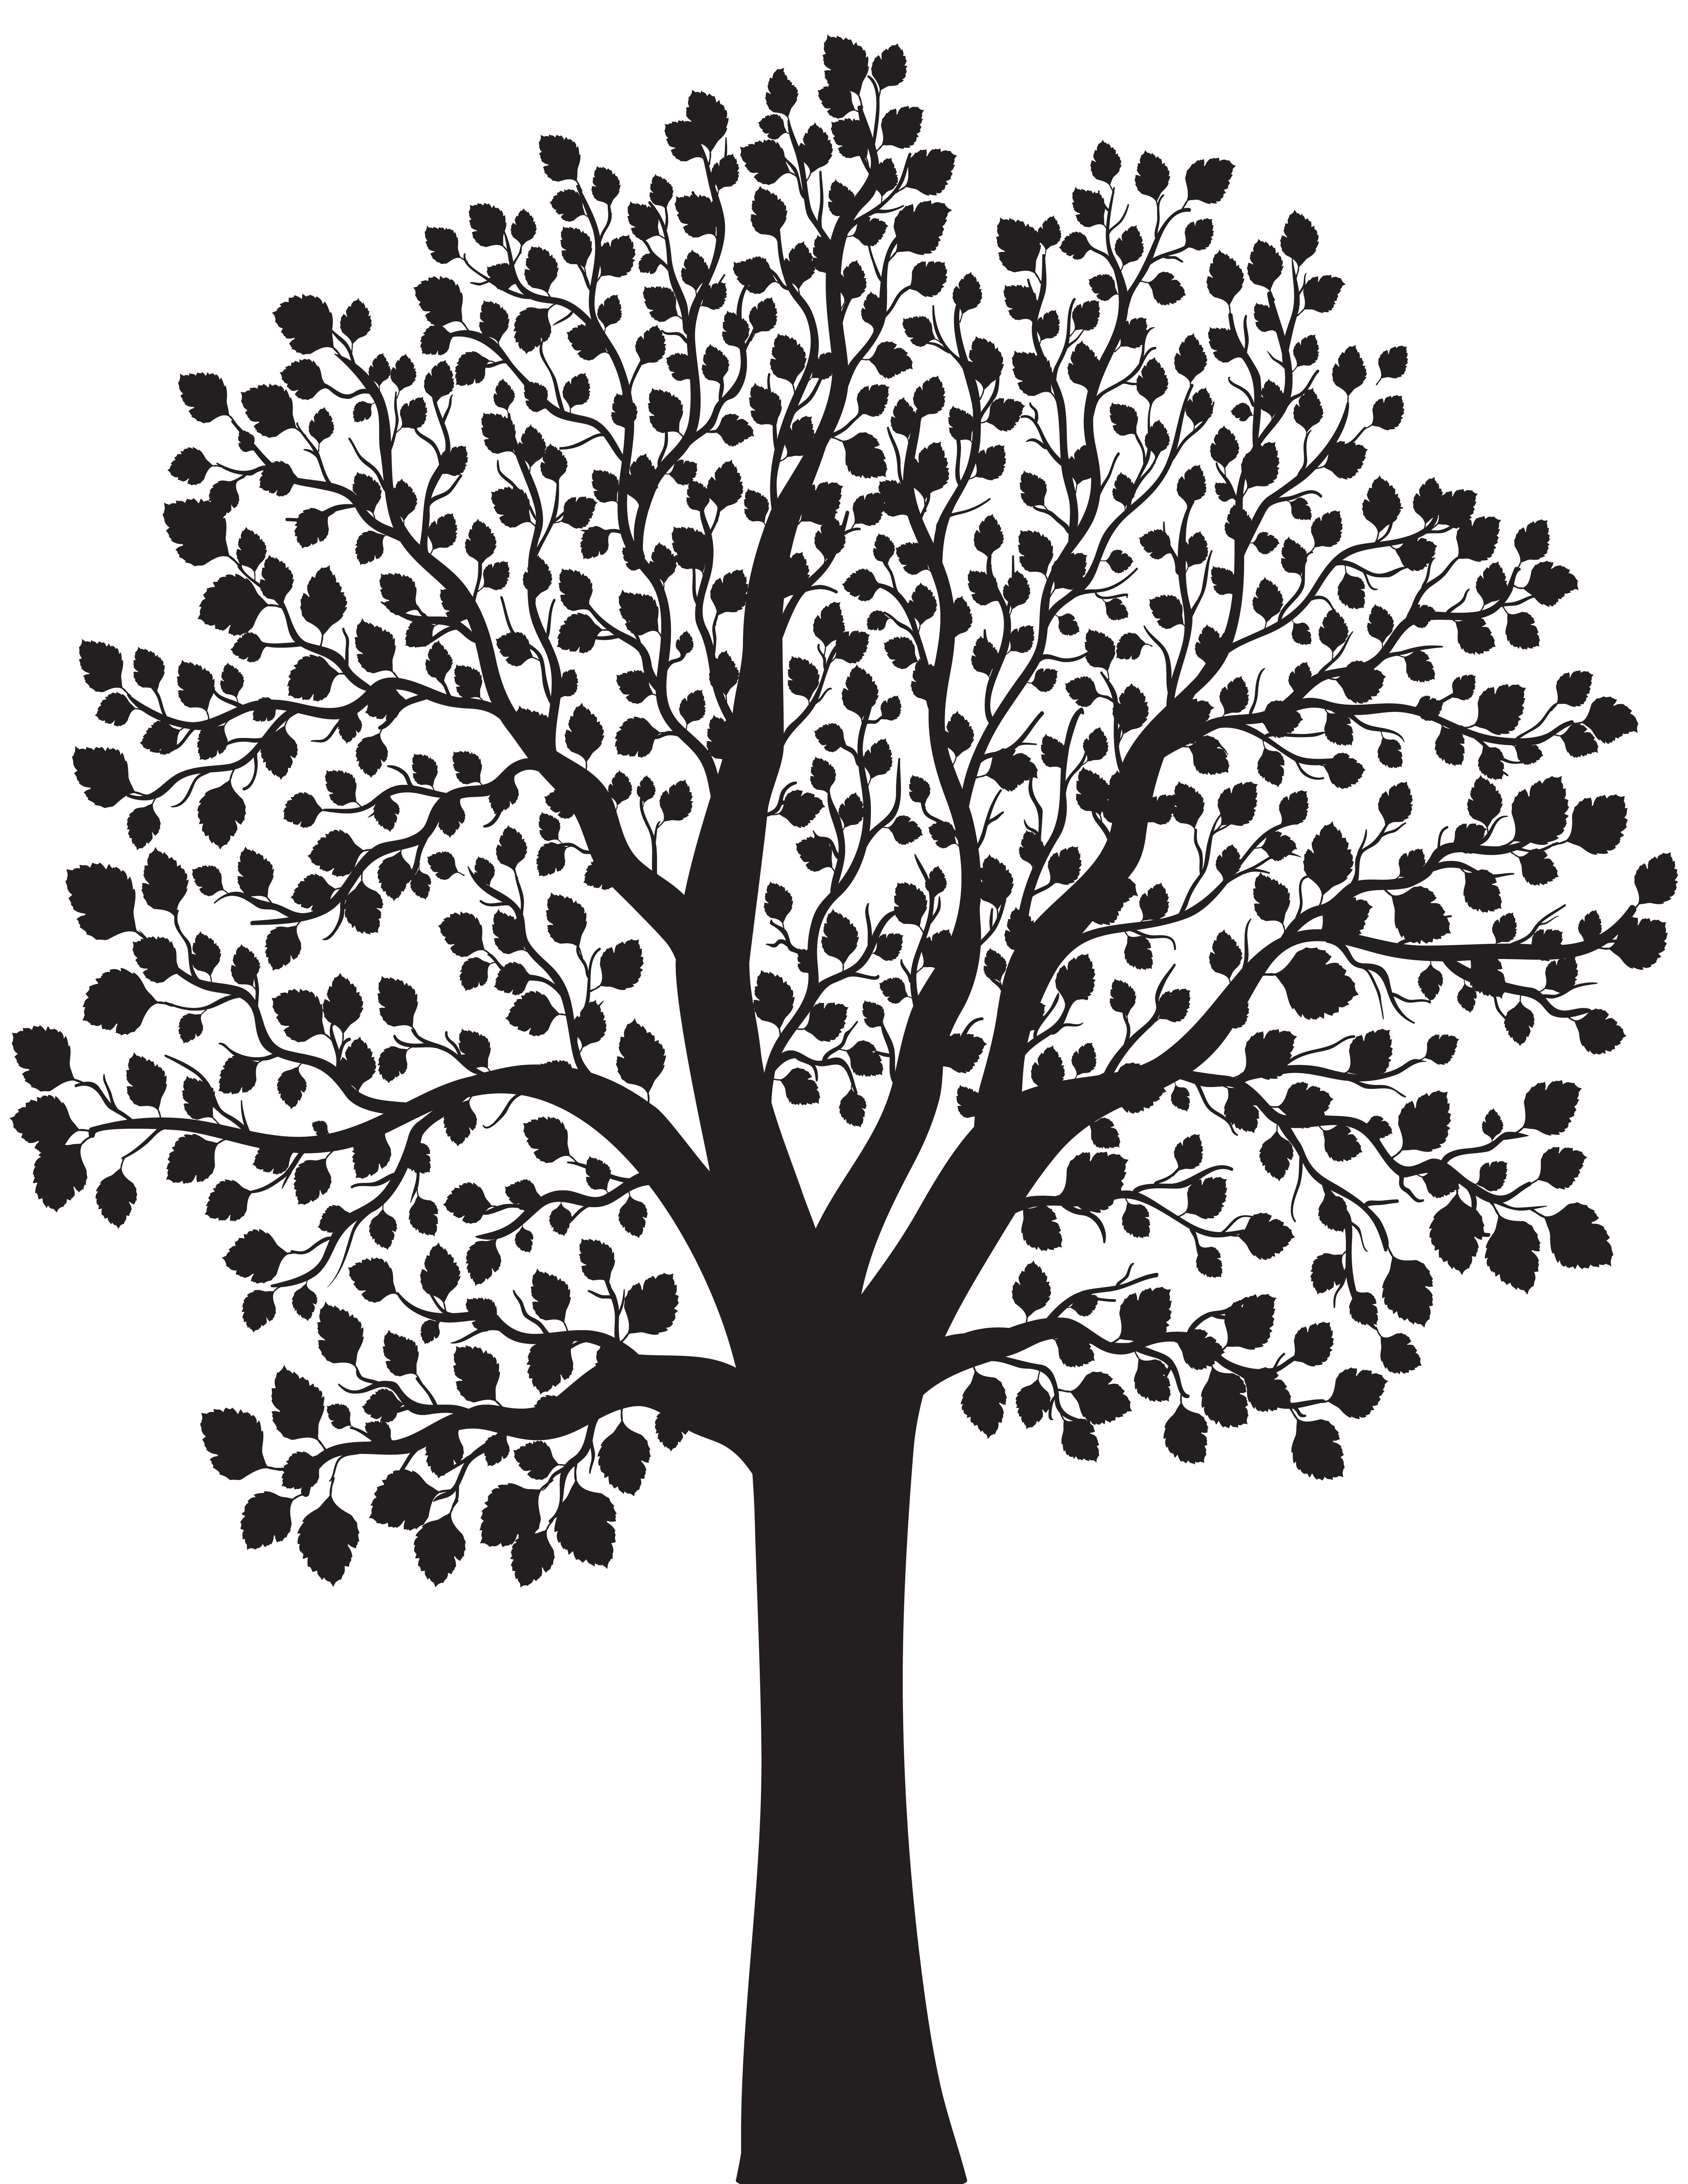 Tree Silhouette Illustration Tree Silhouette Png Clip Art Image Png ...